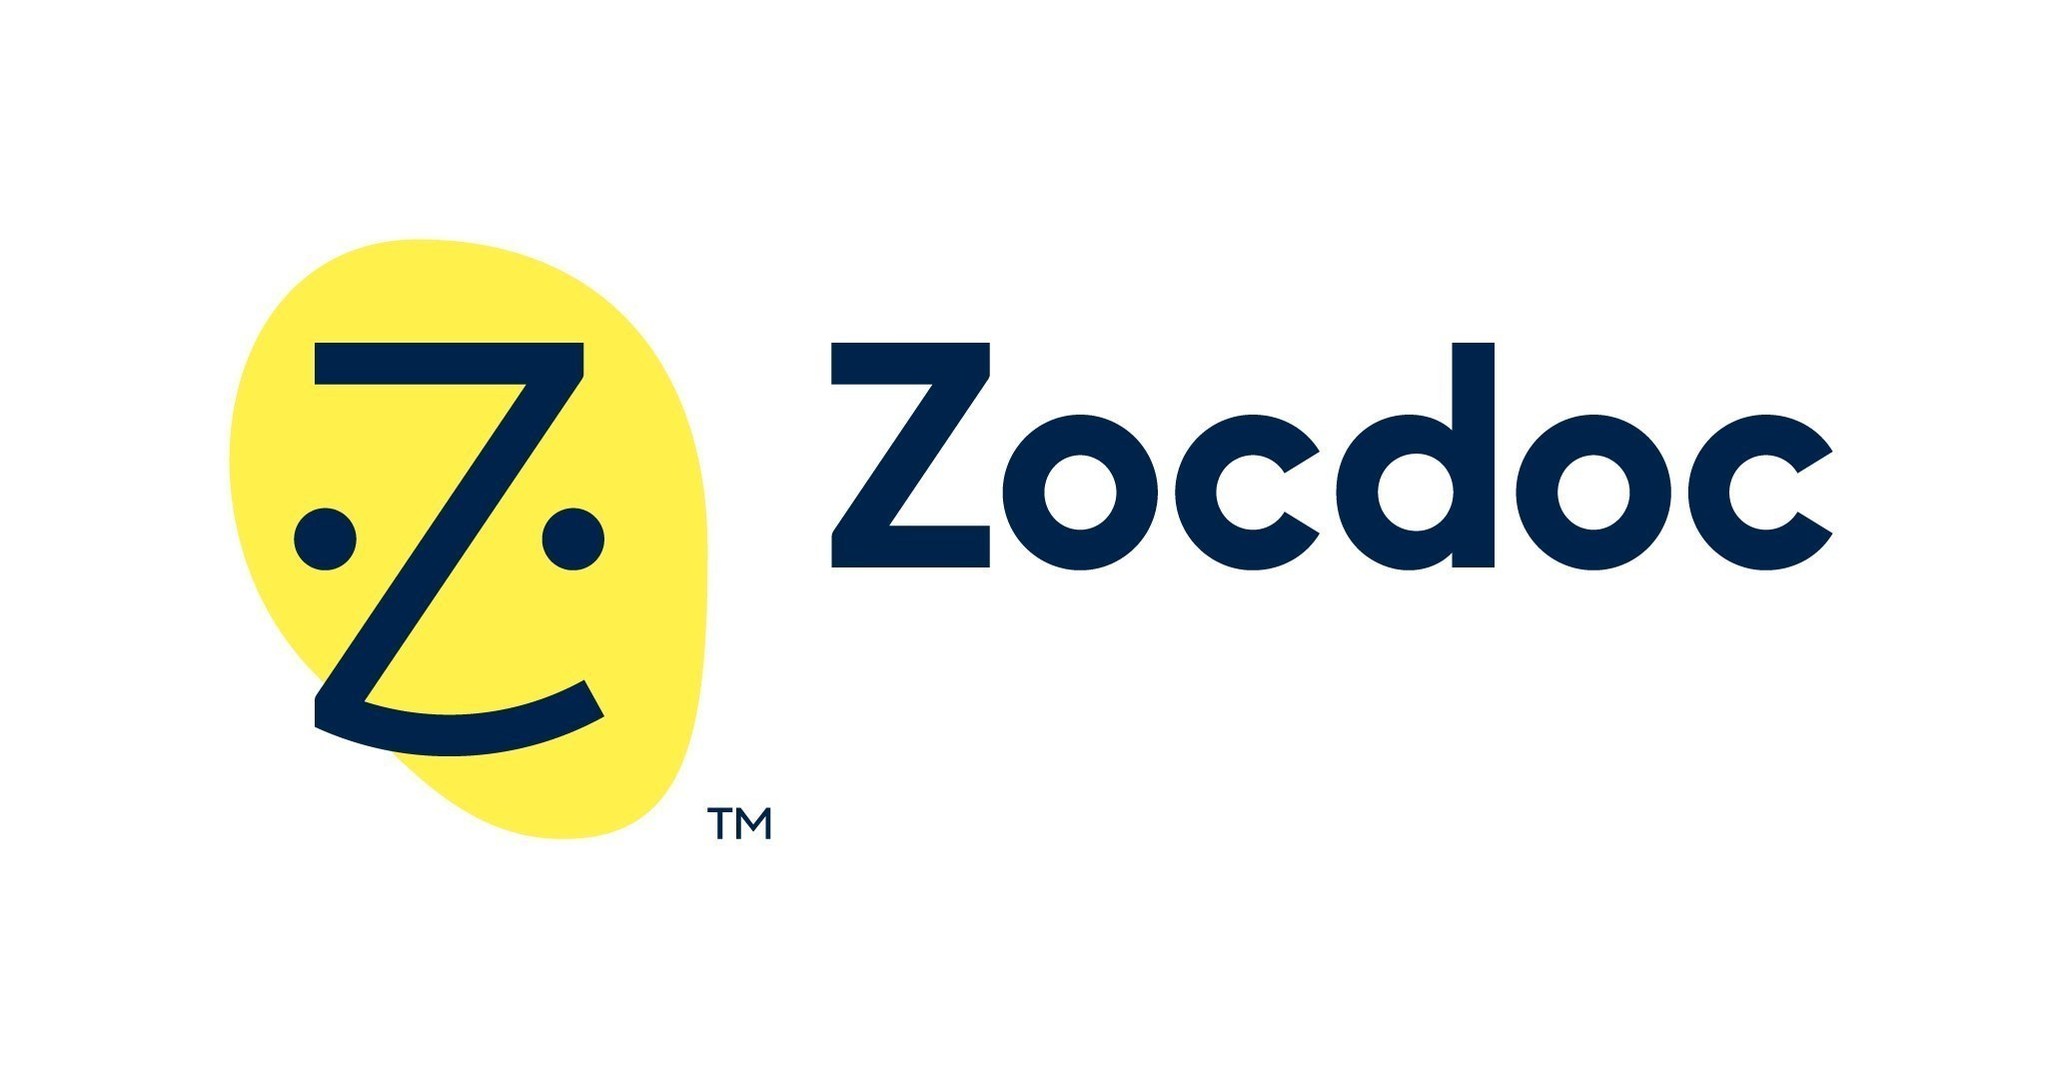 Zocdoc Launches its First-Ever Public API Platform: Zocdoc for Developers